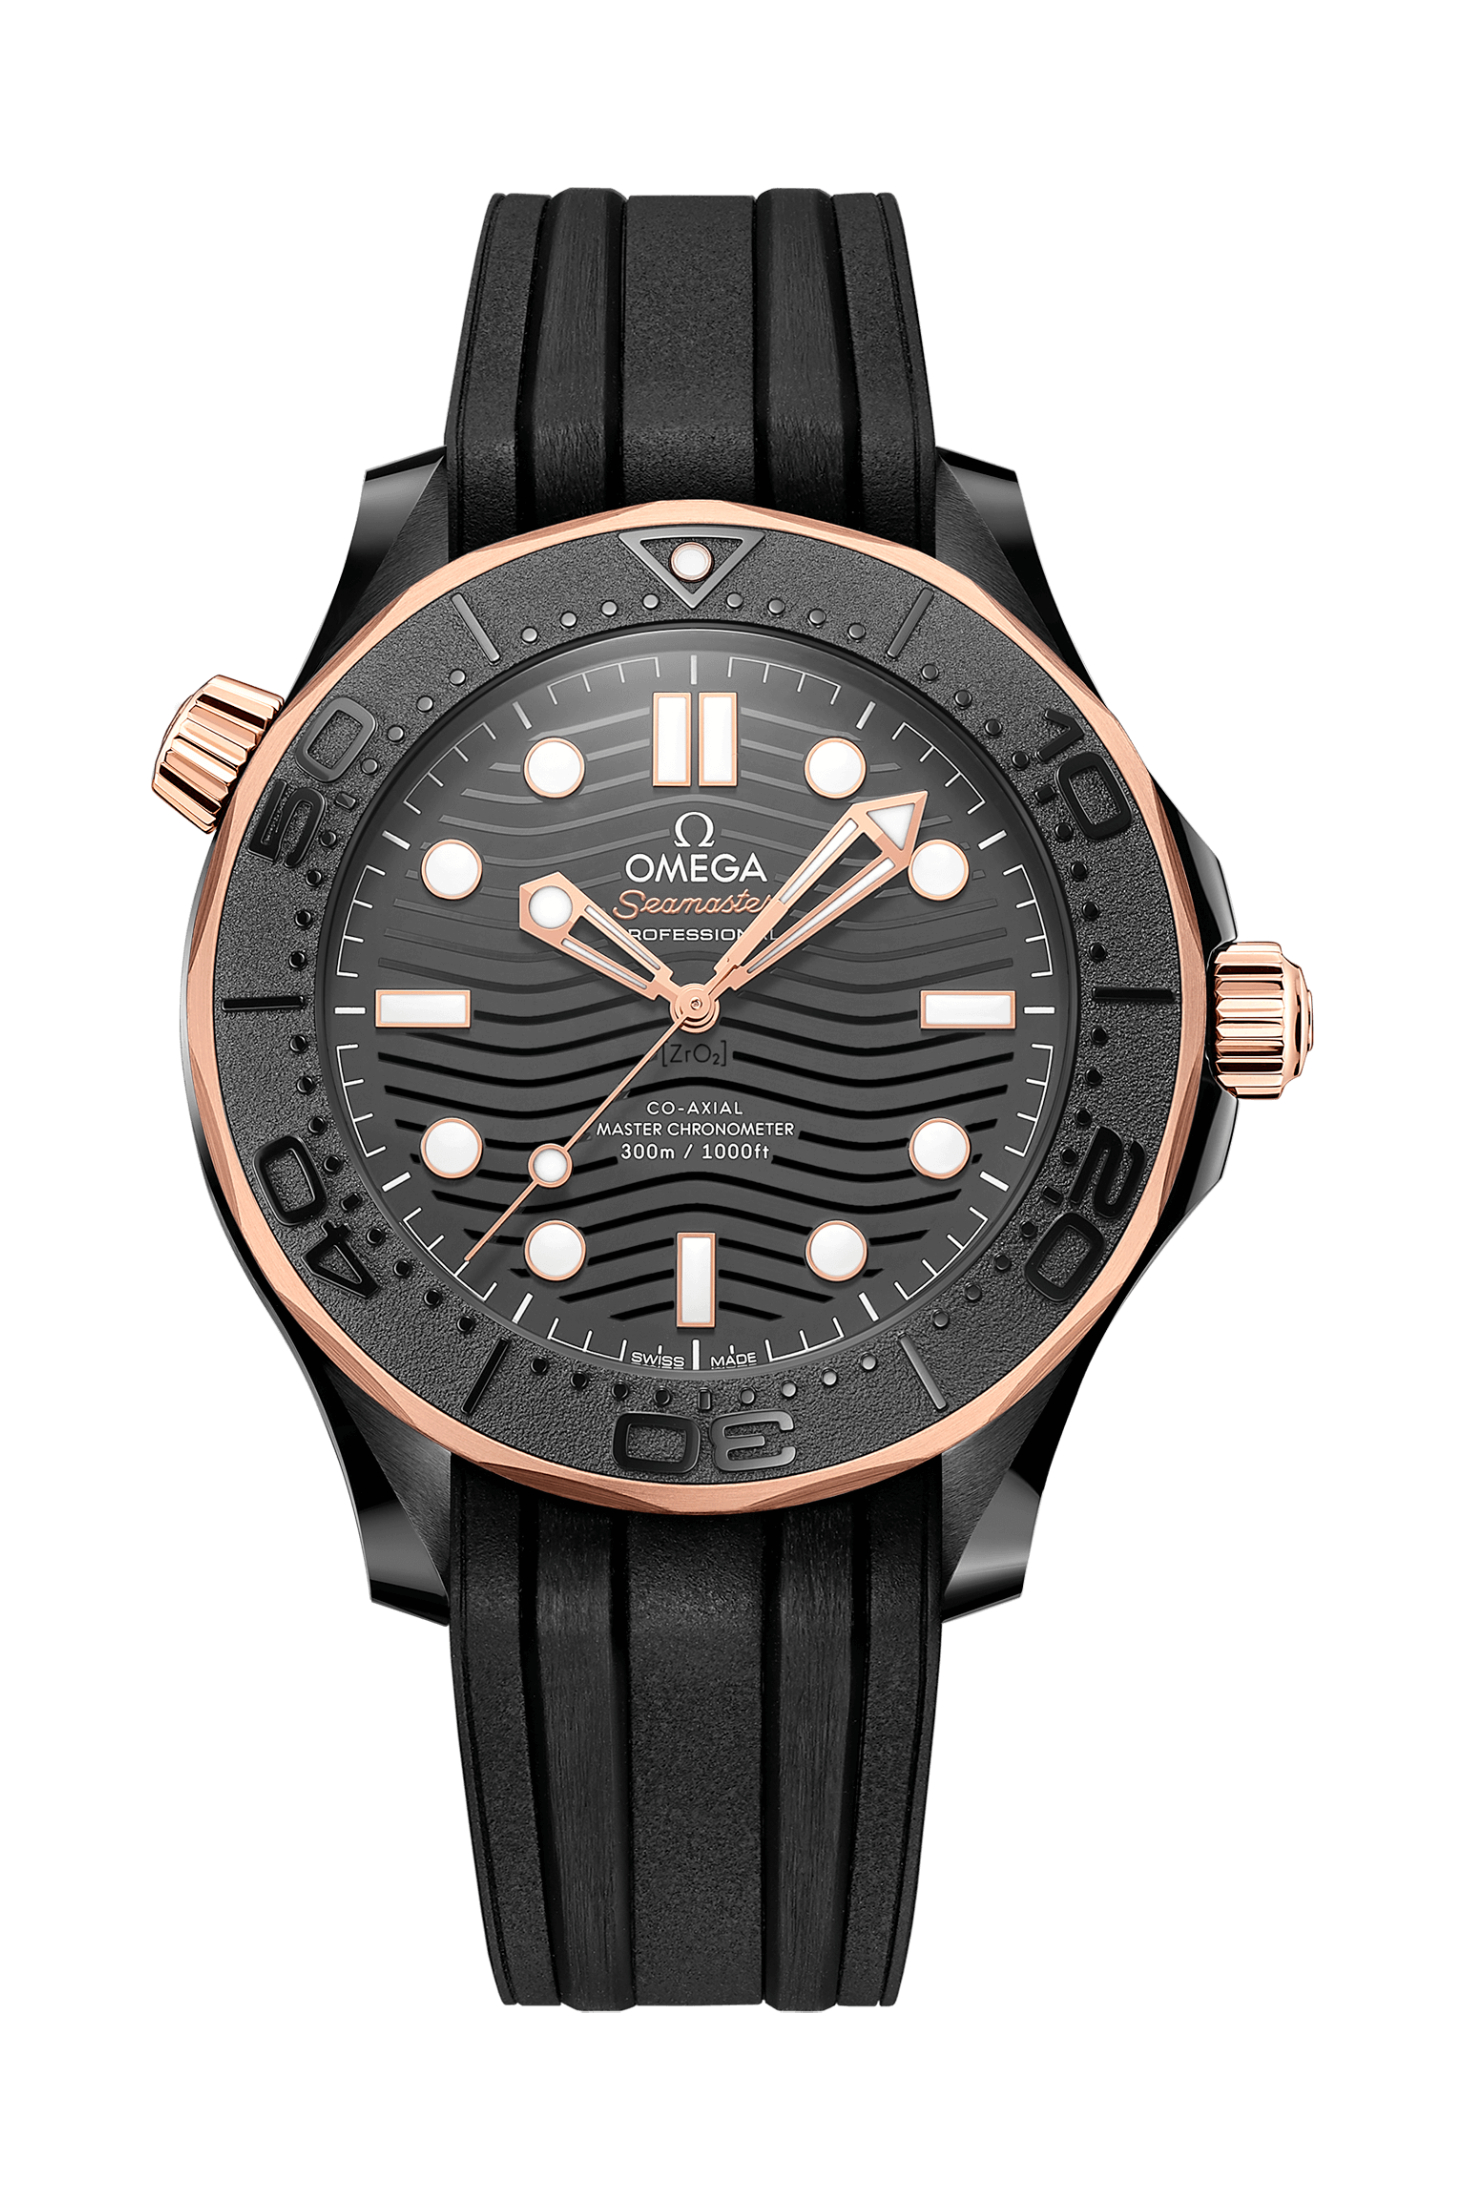 Men's watch / unisex  OMEGA, Diver 300m Co Axial Master Chronometer / 43.5mm, SKU: 210.62.44.20.01.001 | watchapproach.com